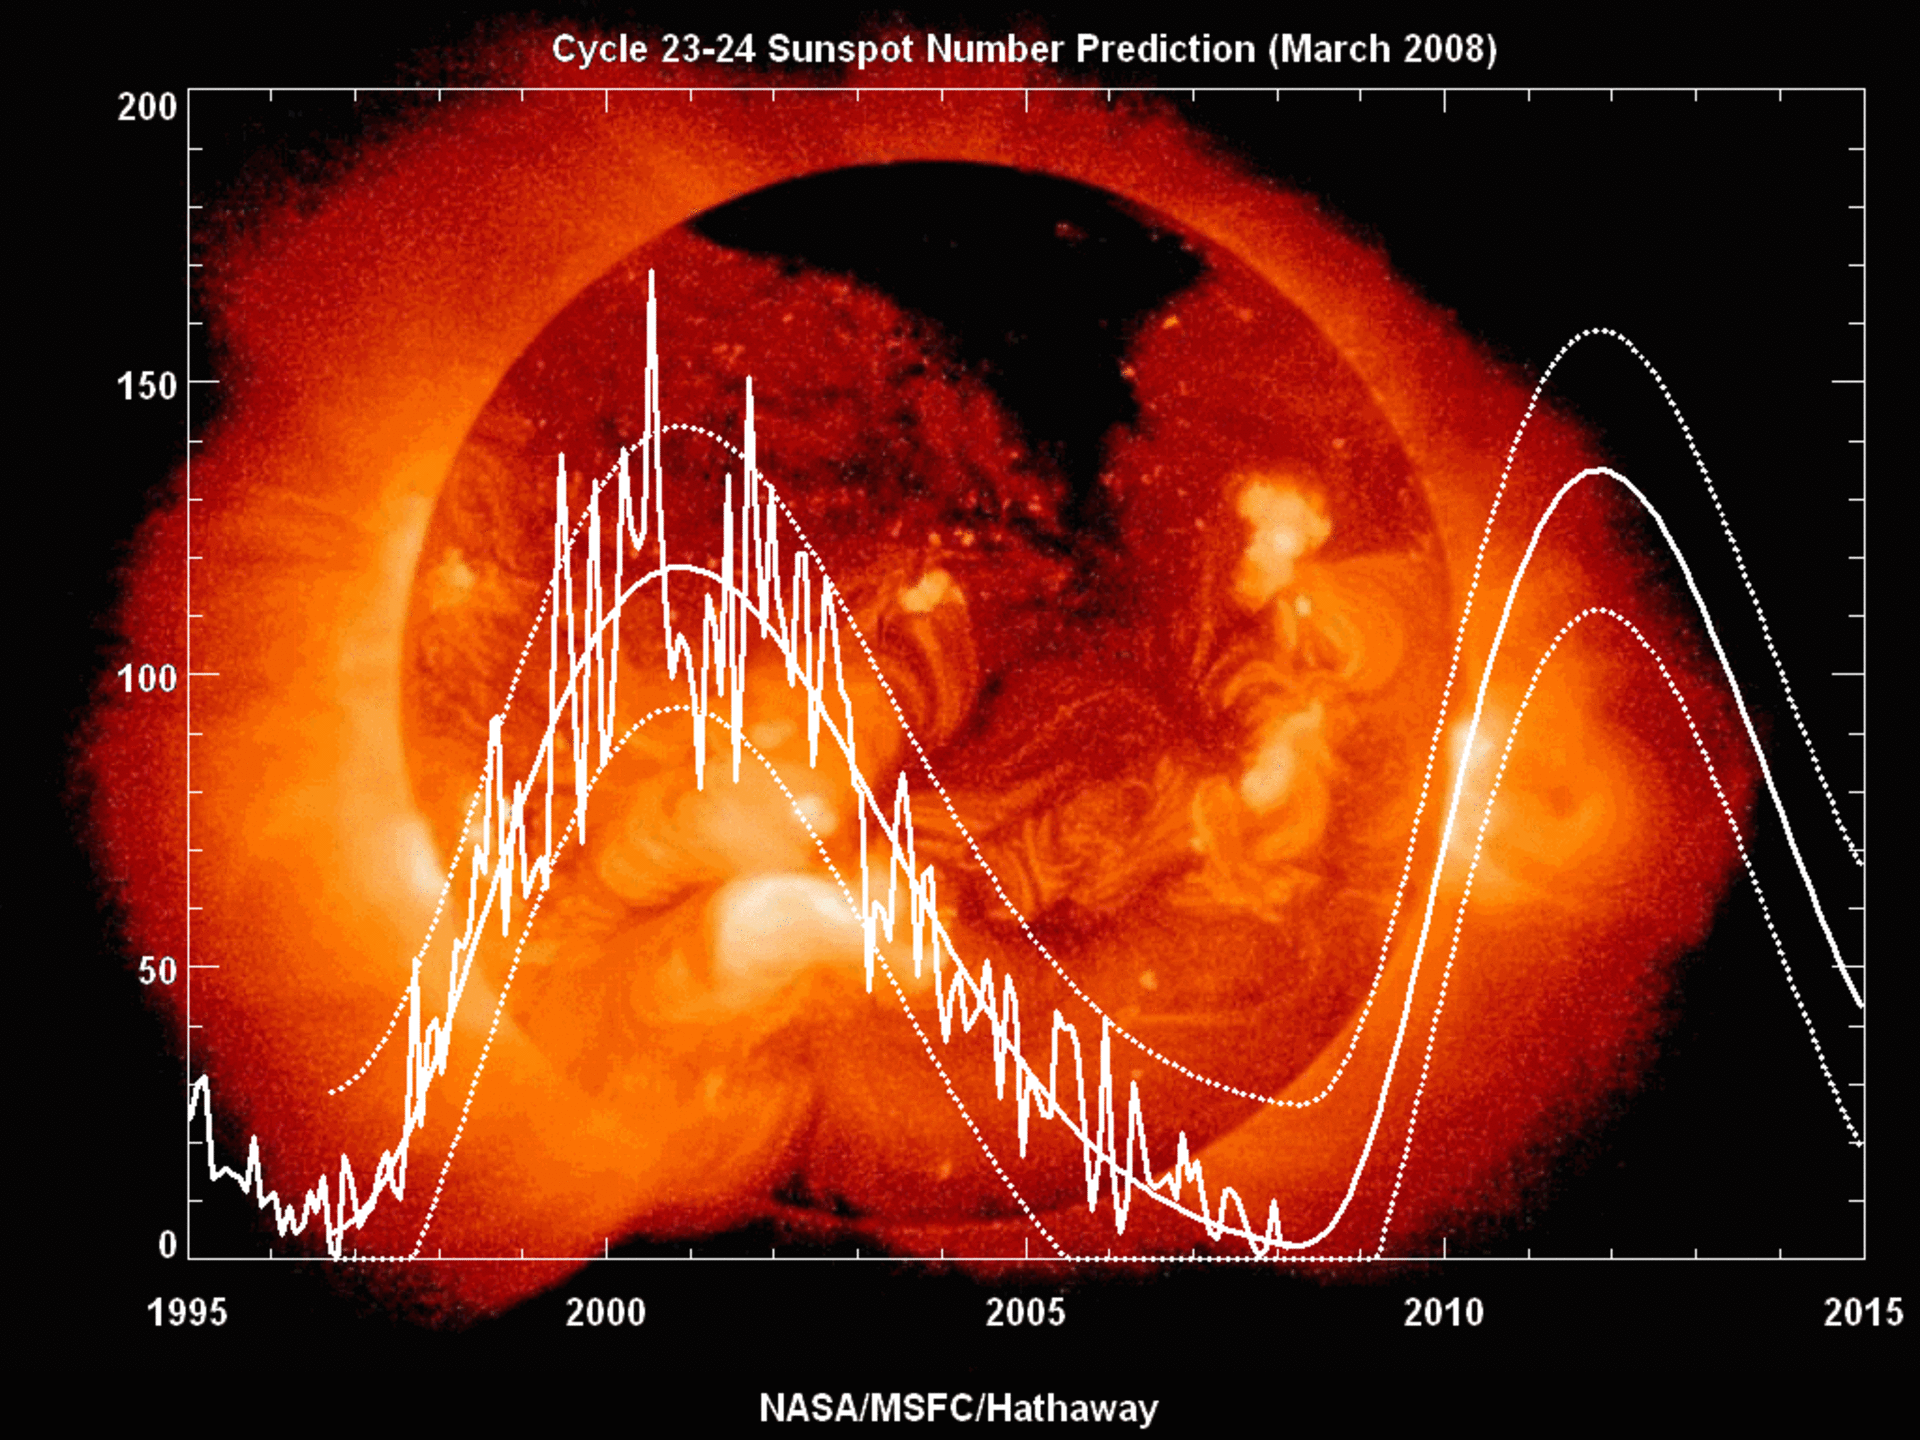 Sunspot count versus year